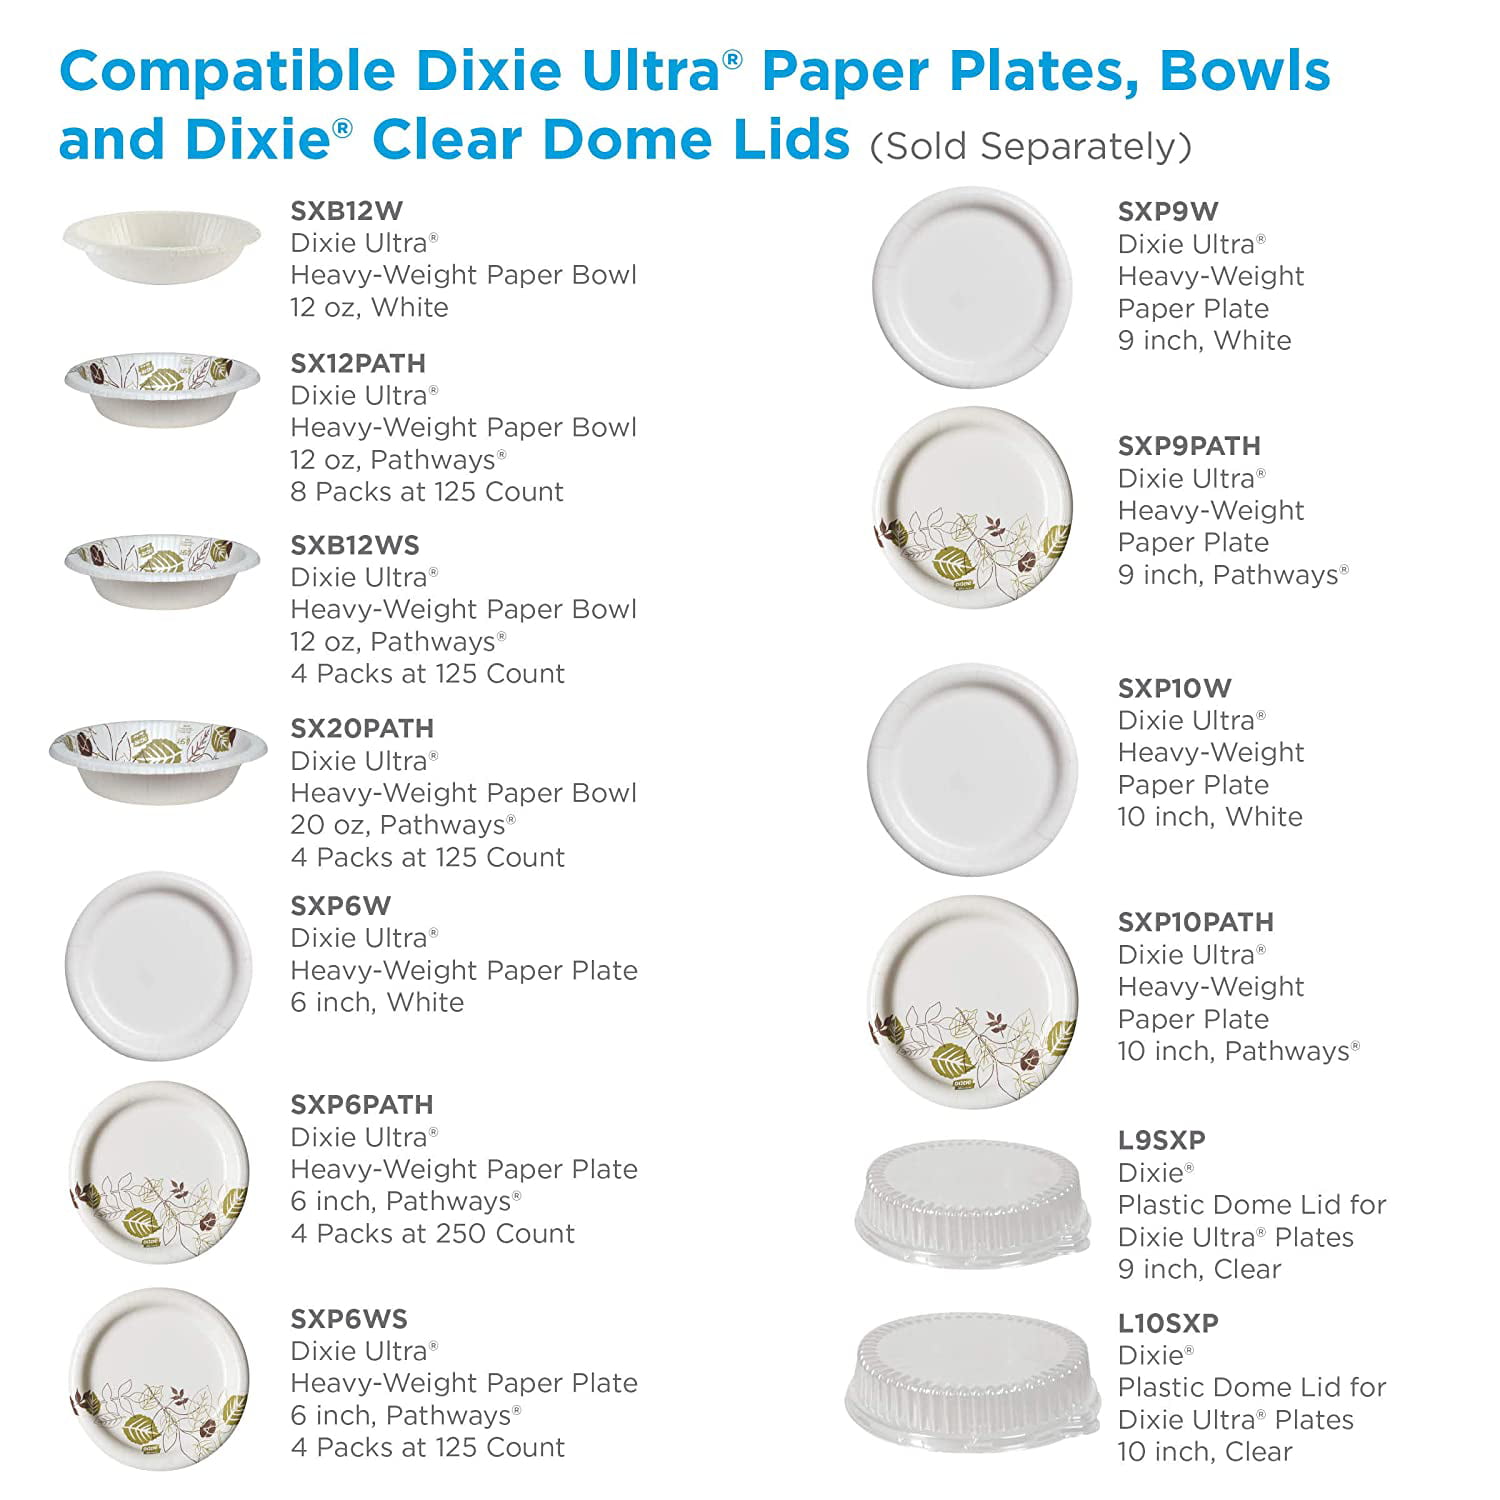 Dixie Ultra 10 Heavy-Weight Paper Plates by GP PRO (Georgia-Pacific);  Pathways; SXP10PATH; 500 Count (125 Plates Per Pack; 4 Packs Per Case)